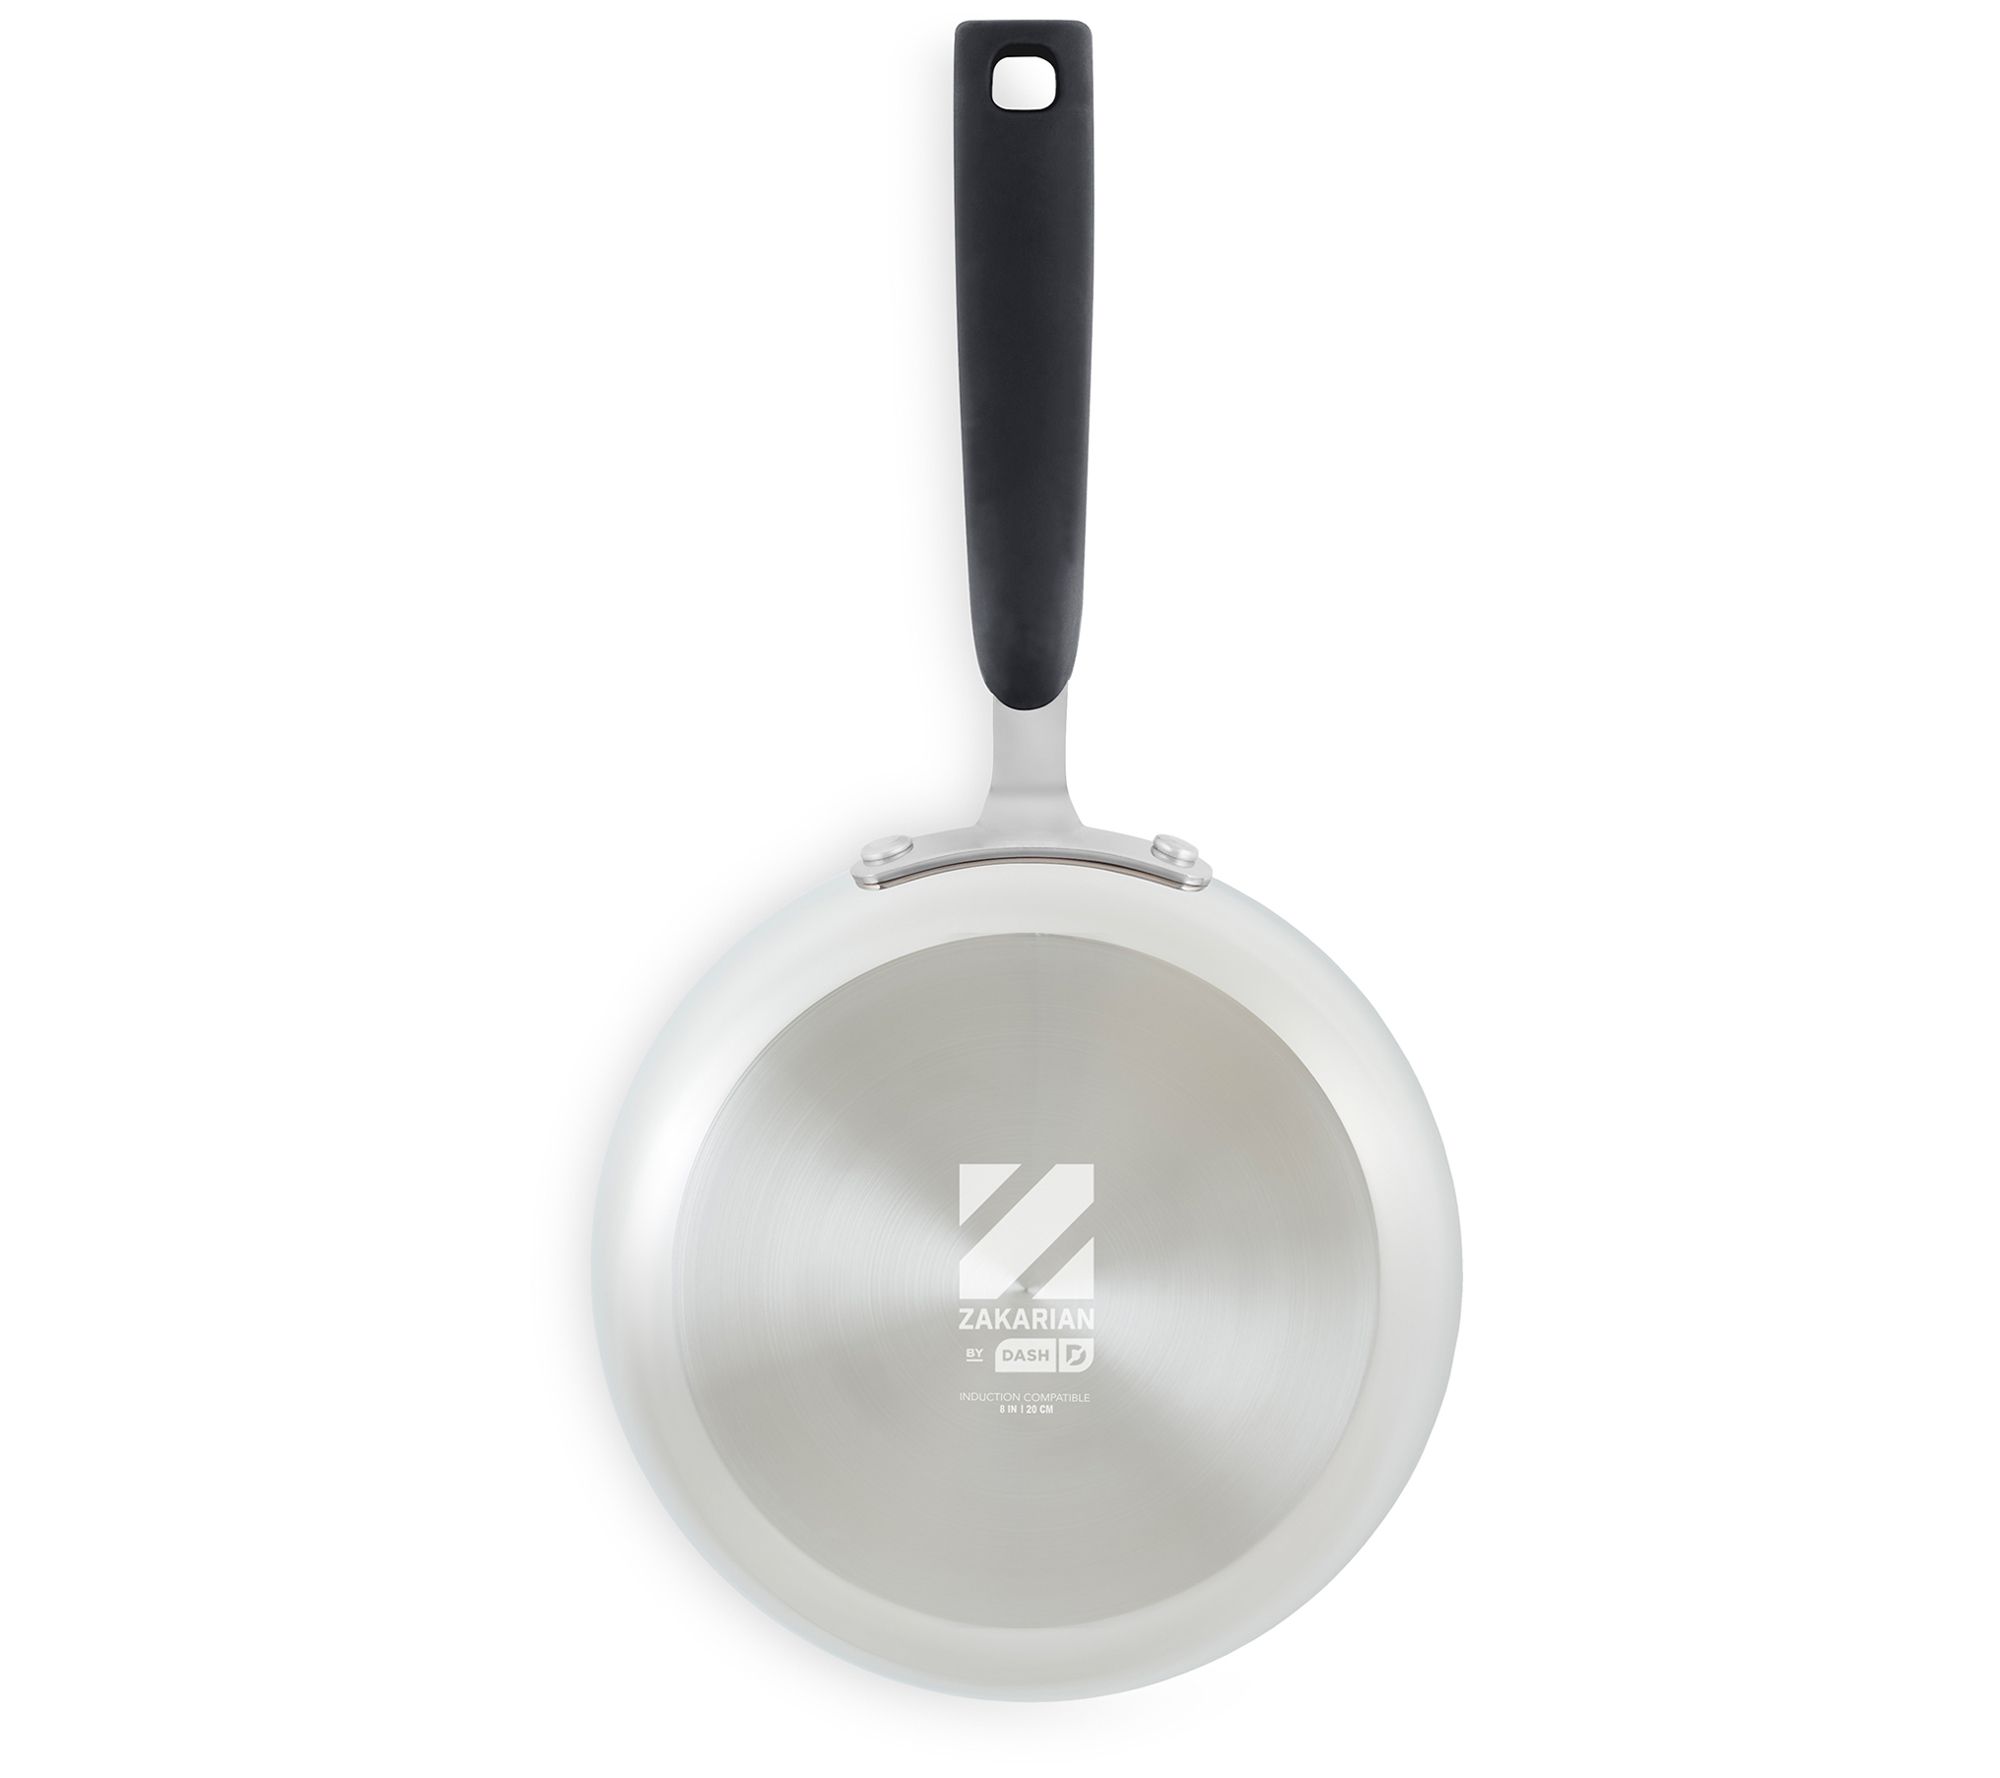 Kitchen - Cookware - Dash Mini Skillet - Online Shopping for Canadians